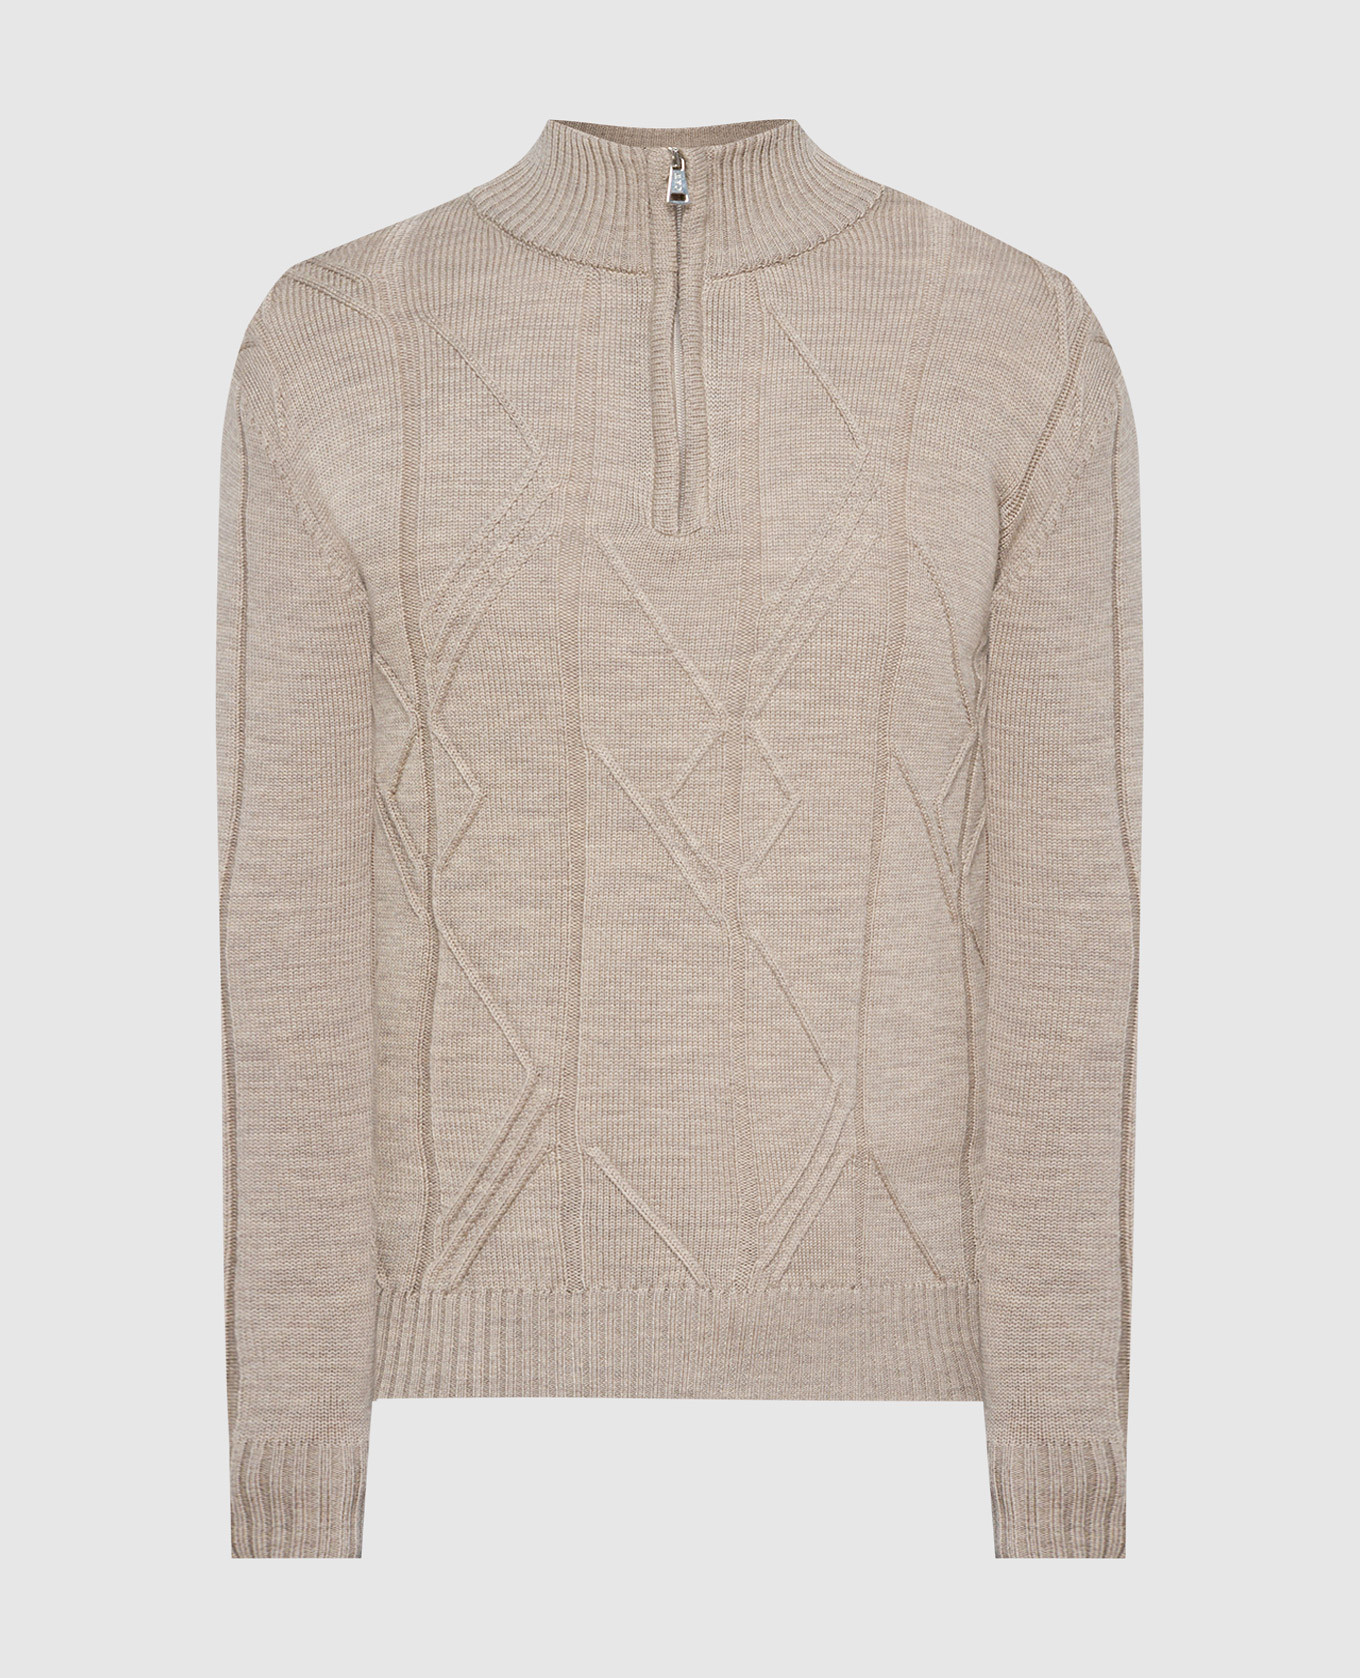 Beige sweater made of wool in a textured pattern